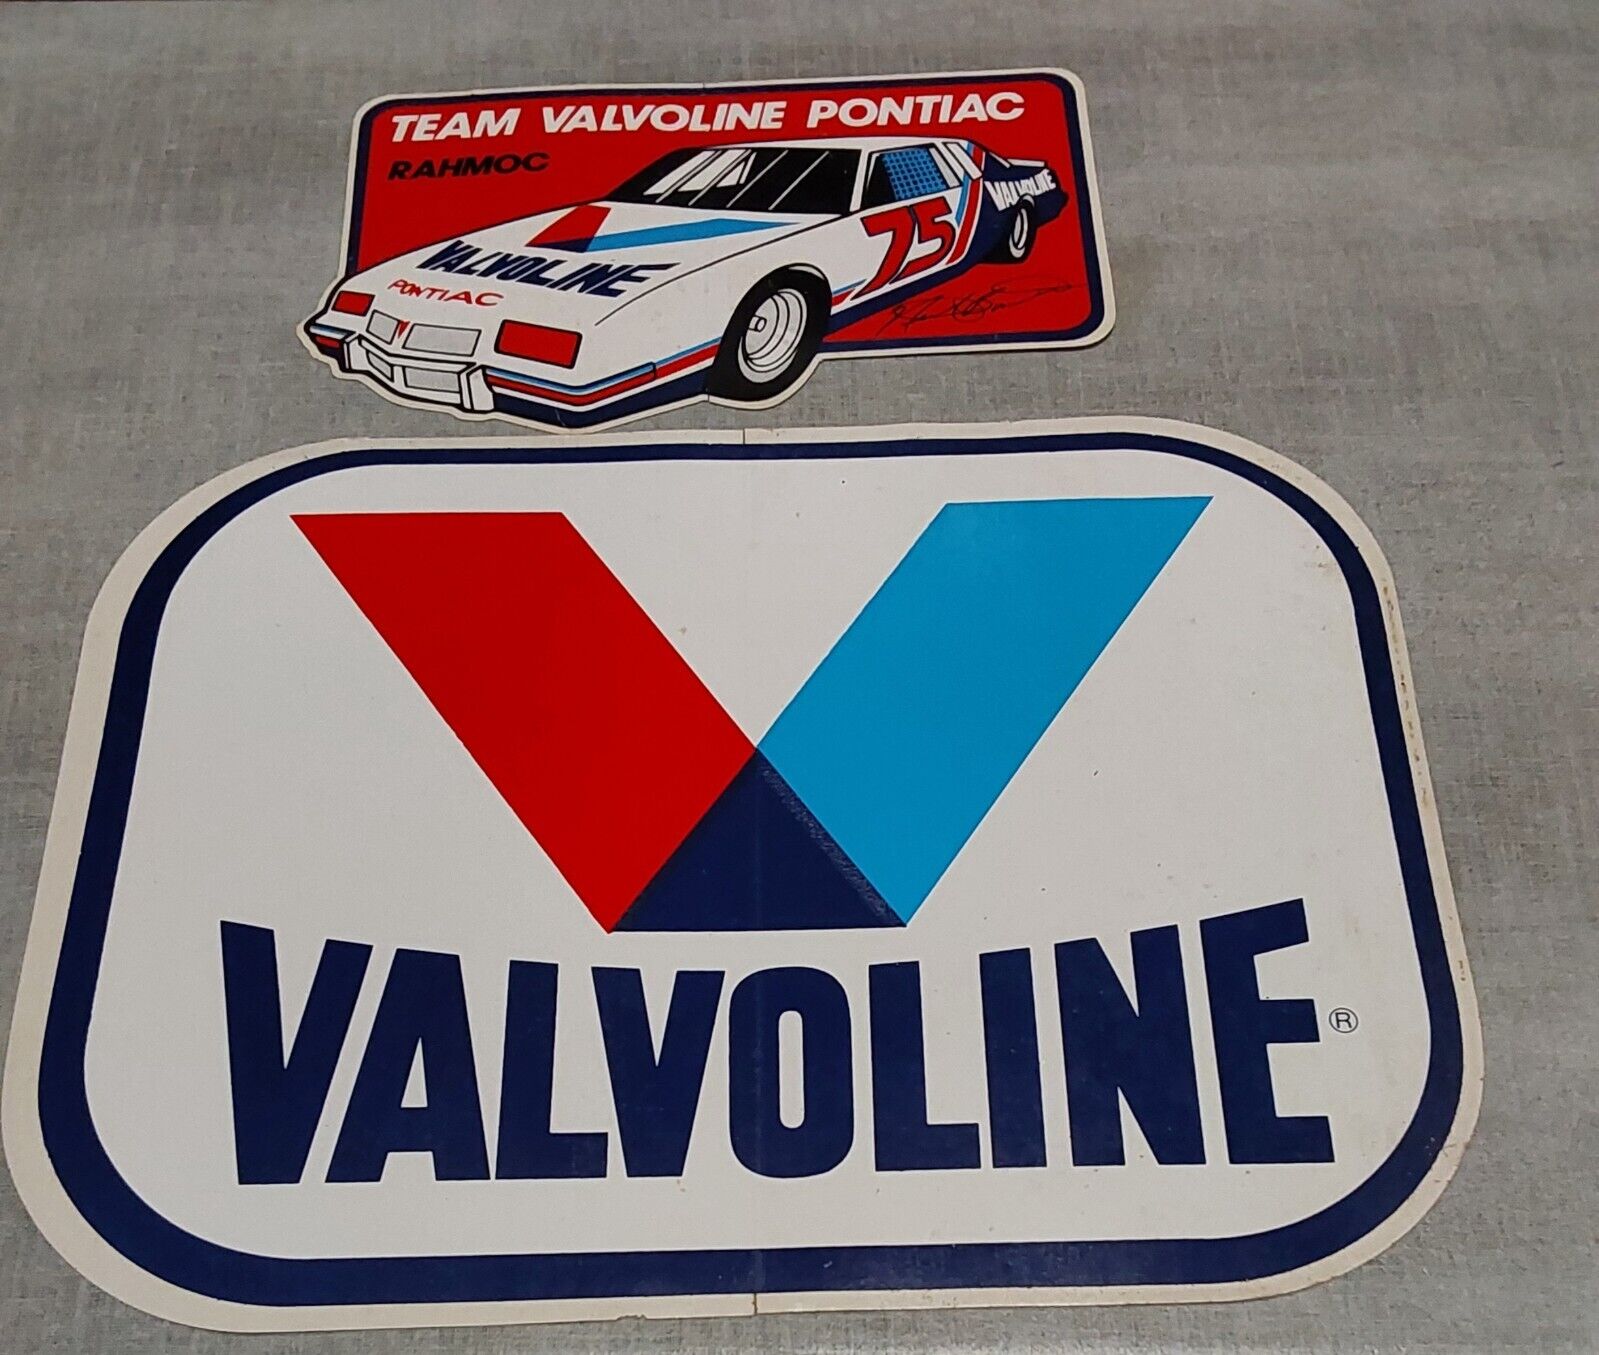 Lot of 2 Valvoline Decal Stickers